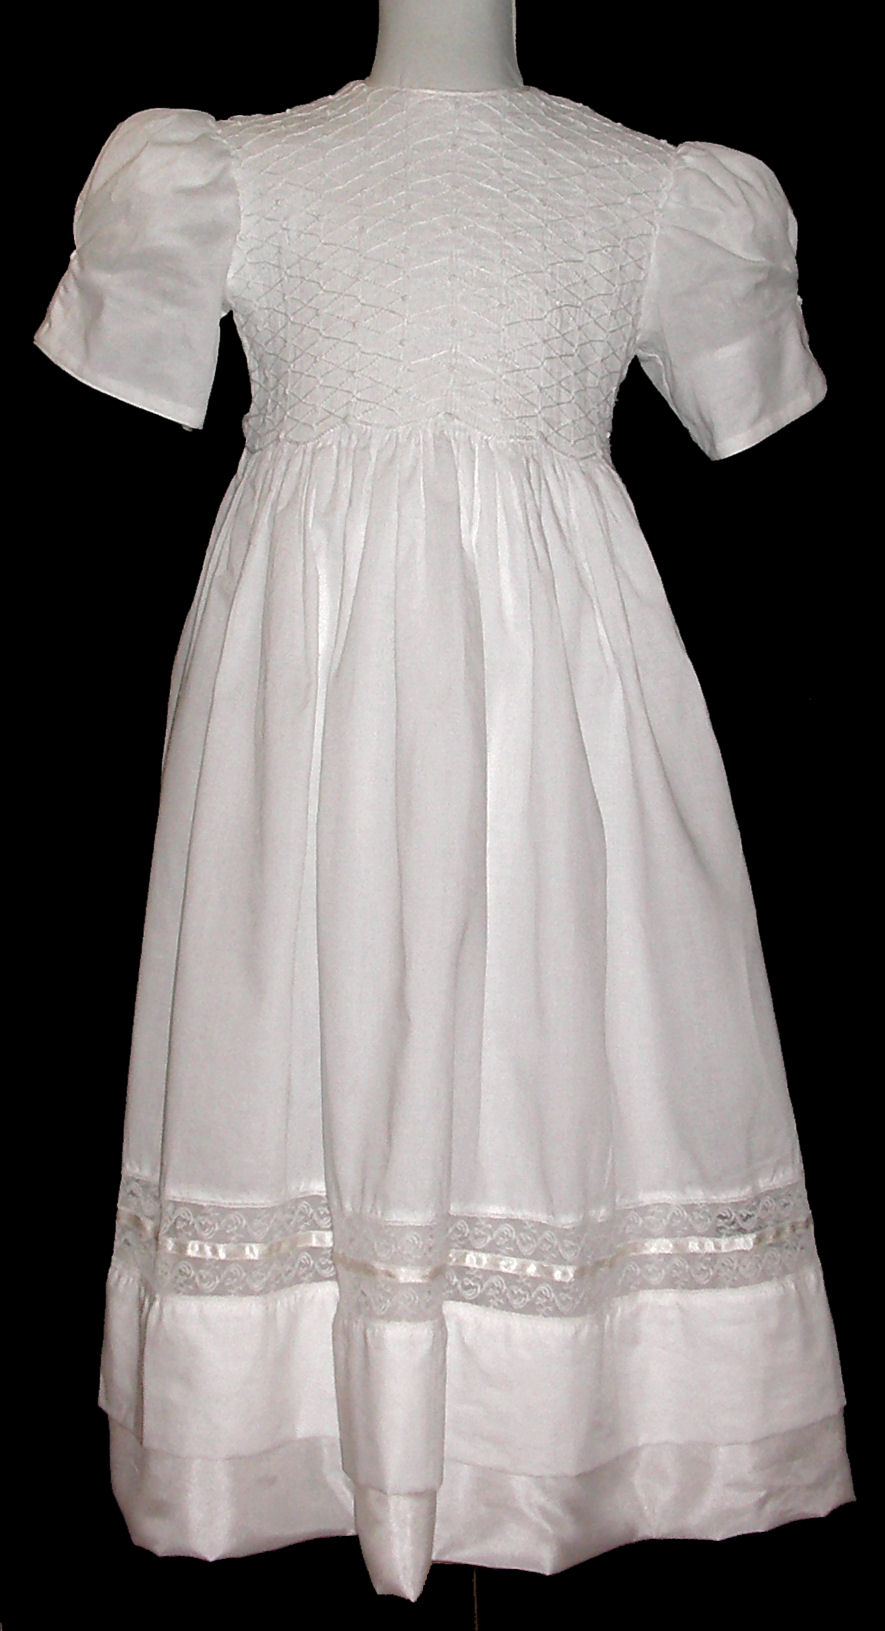 Hand Smocked Dress – First Eucharist (formerly Communion) – Lynne _ FREE Shipping Sz 6 to 10